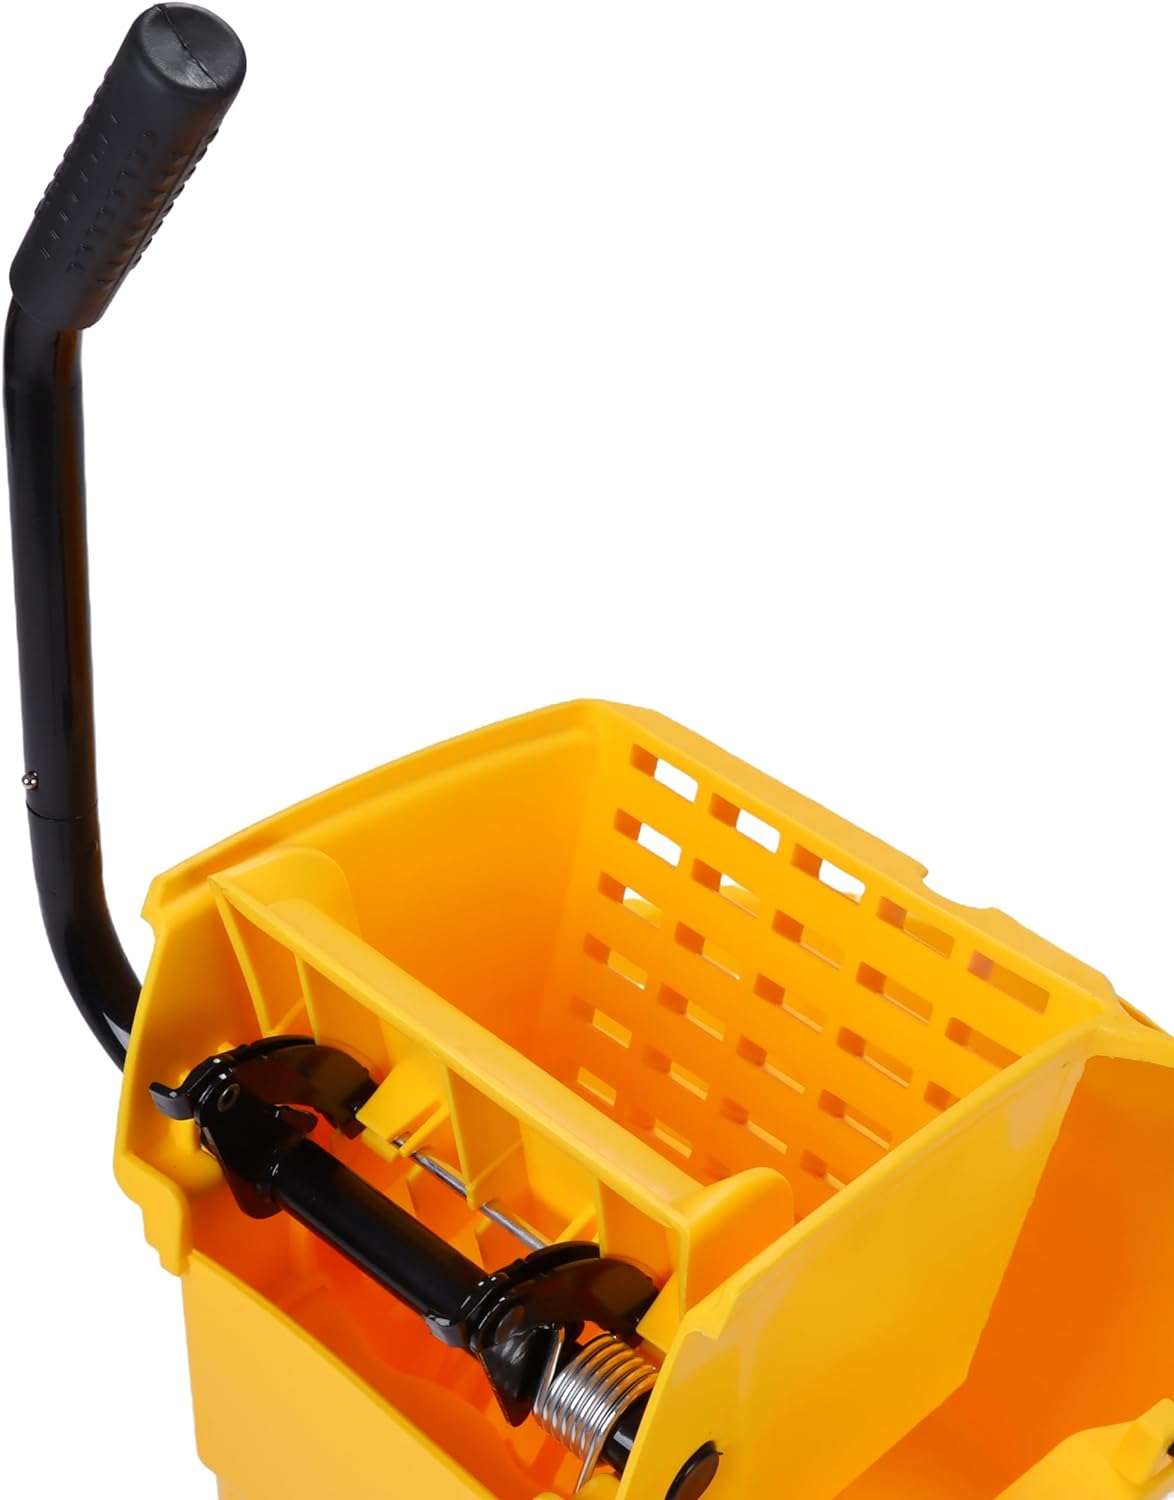 26-QT Side Press Mop Bucket and Wringer, Yellow